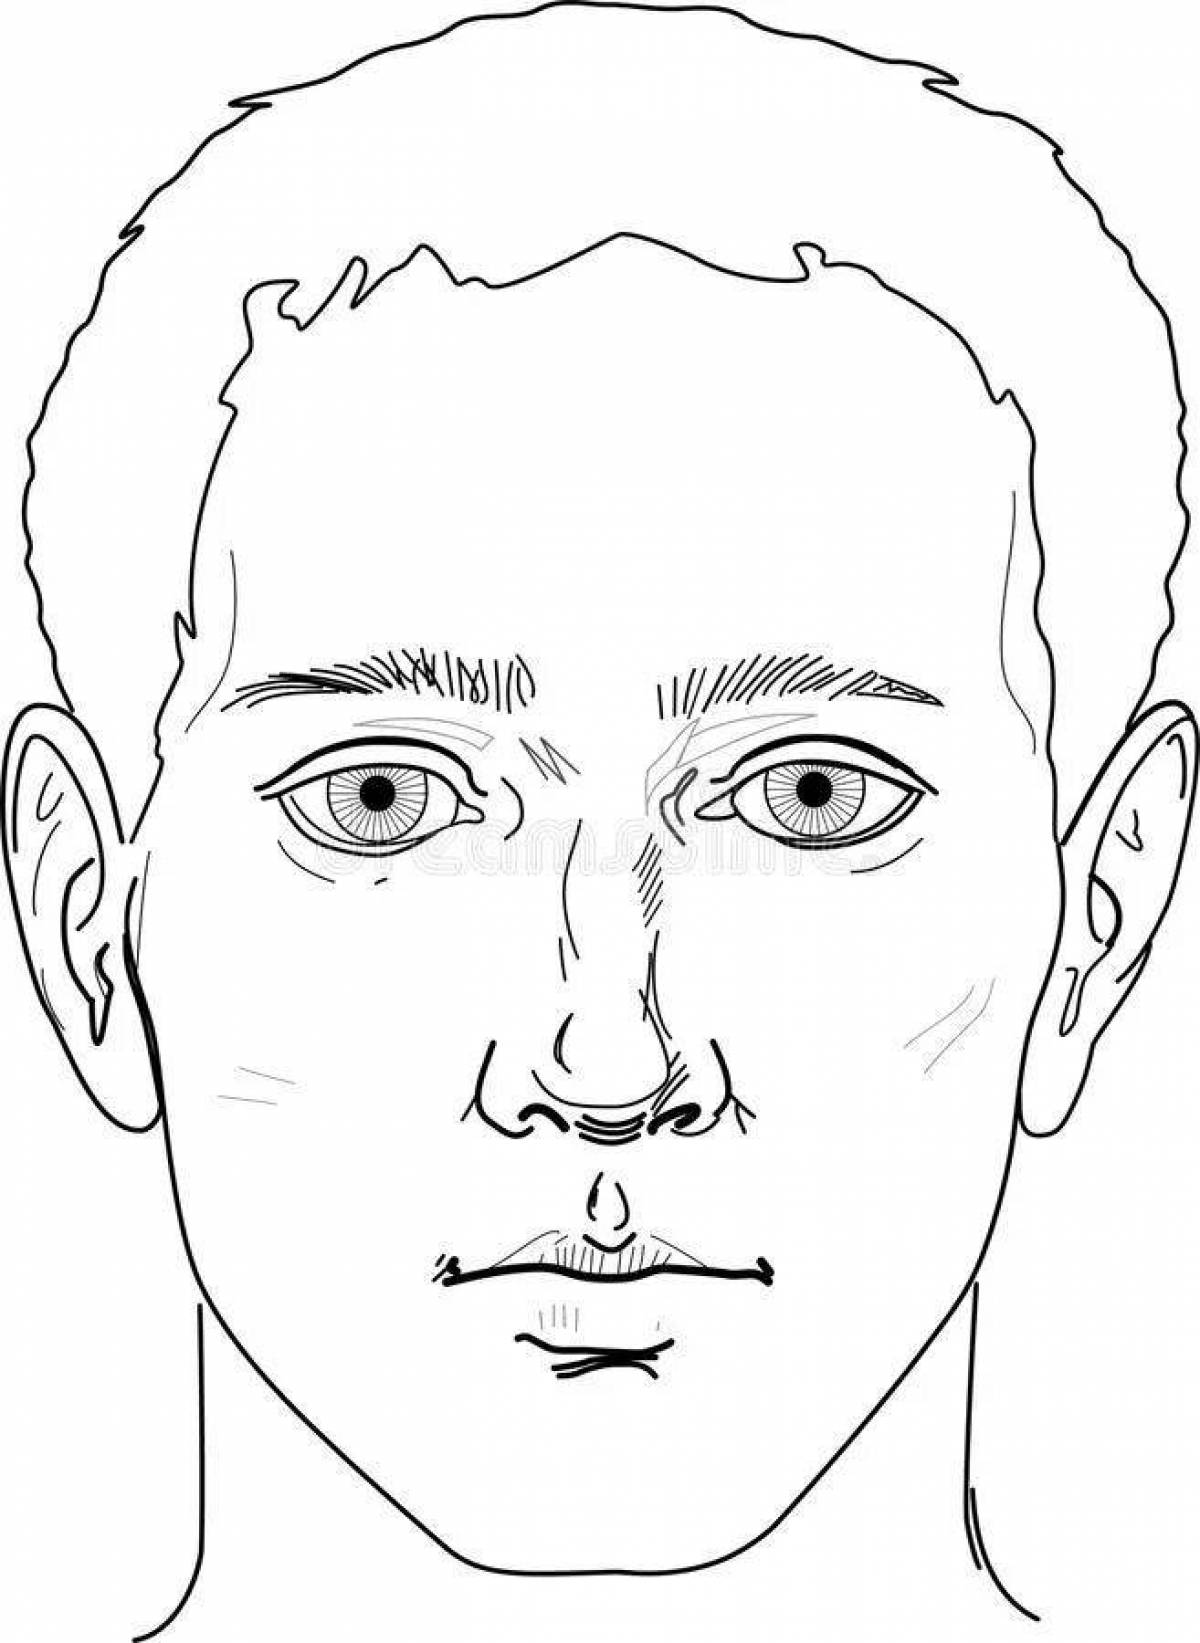 Live man face coloring page